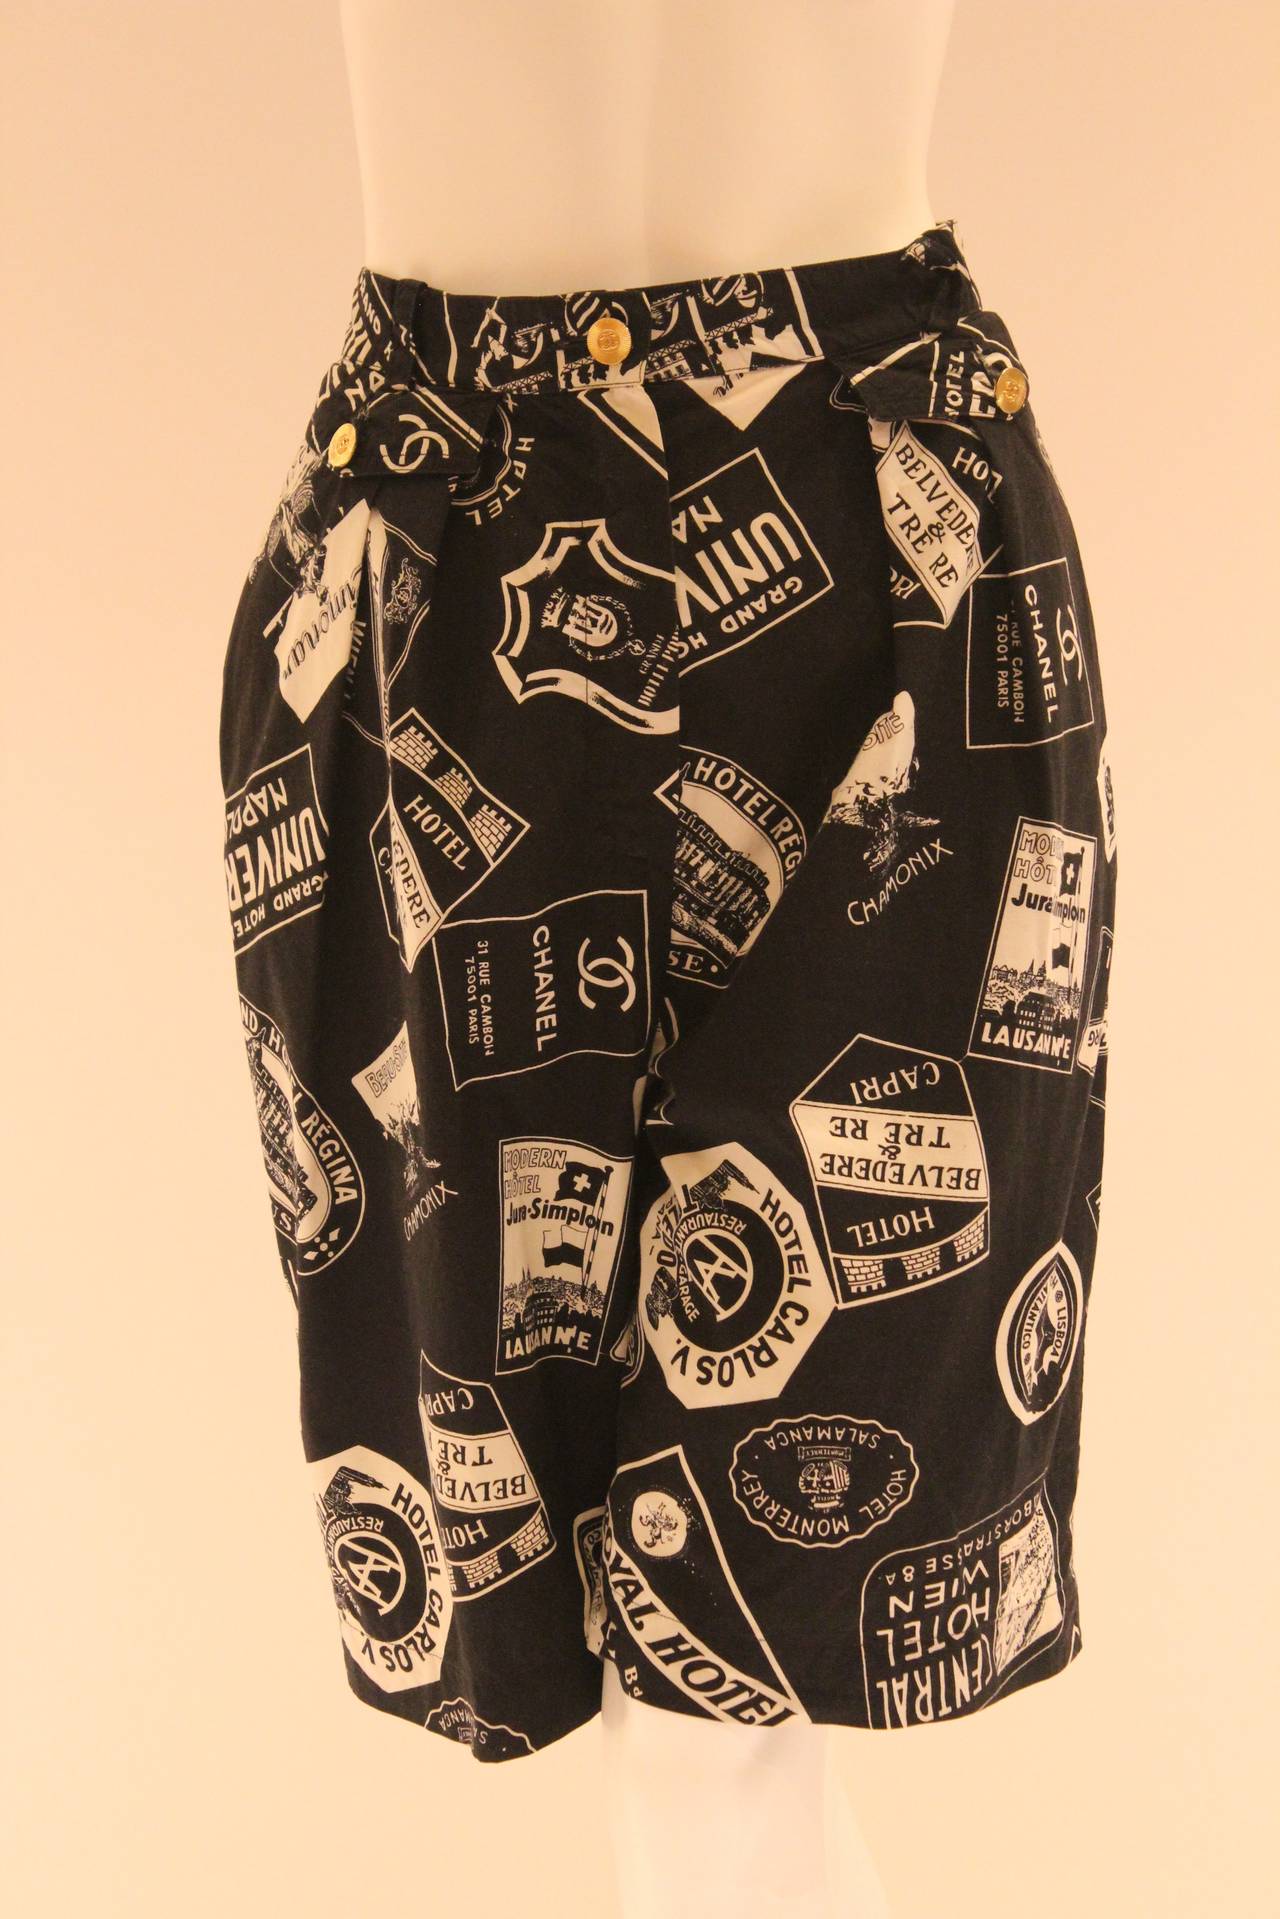 With their bold imprints of Chanel and renowned hotel signs, these patterned shorts are gorgeous and eye-catching. Two pockets are embedded on either hip, both of which close a gold-tone button embossed with the Chanel logo. Also contain a front